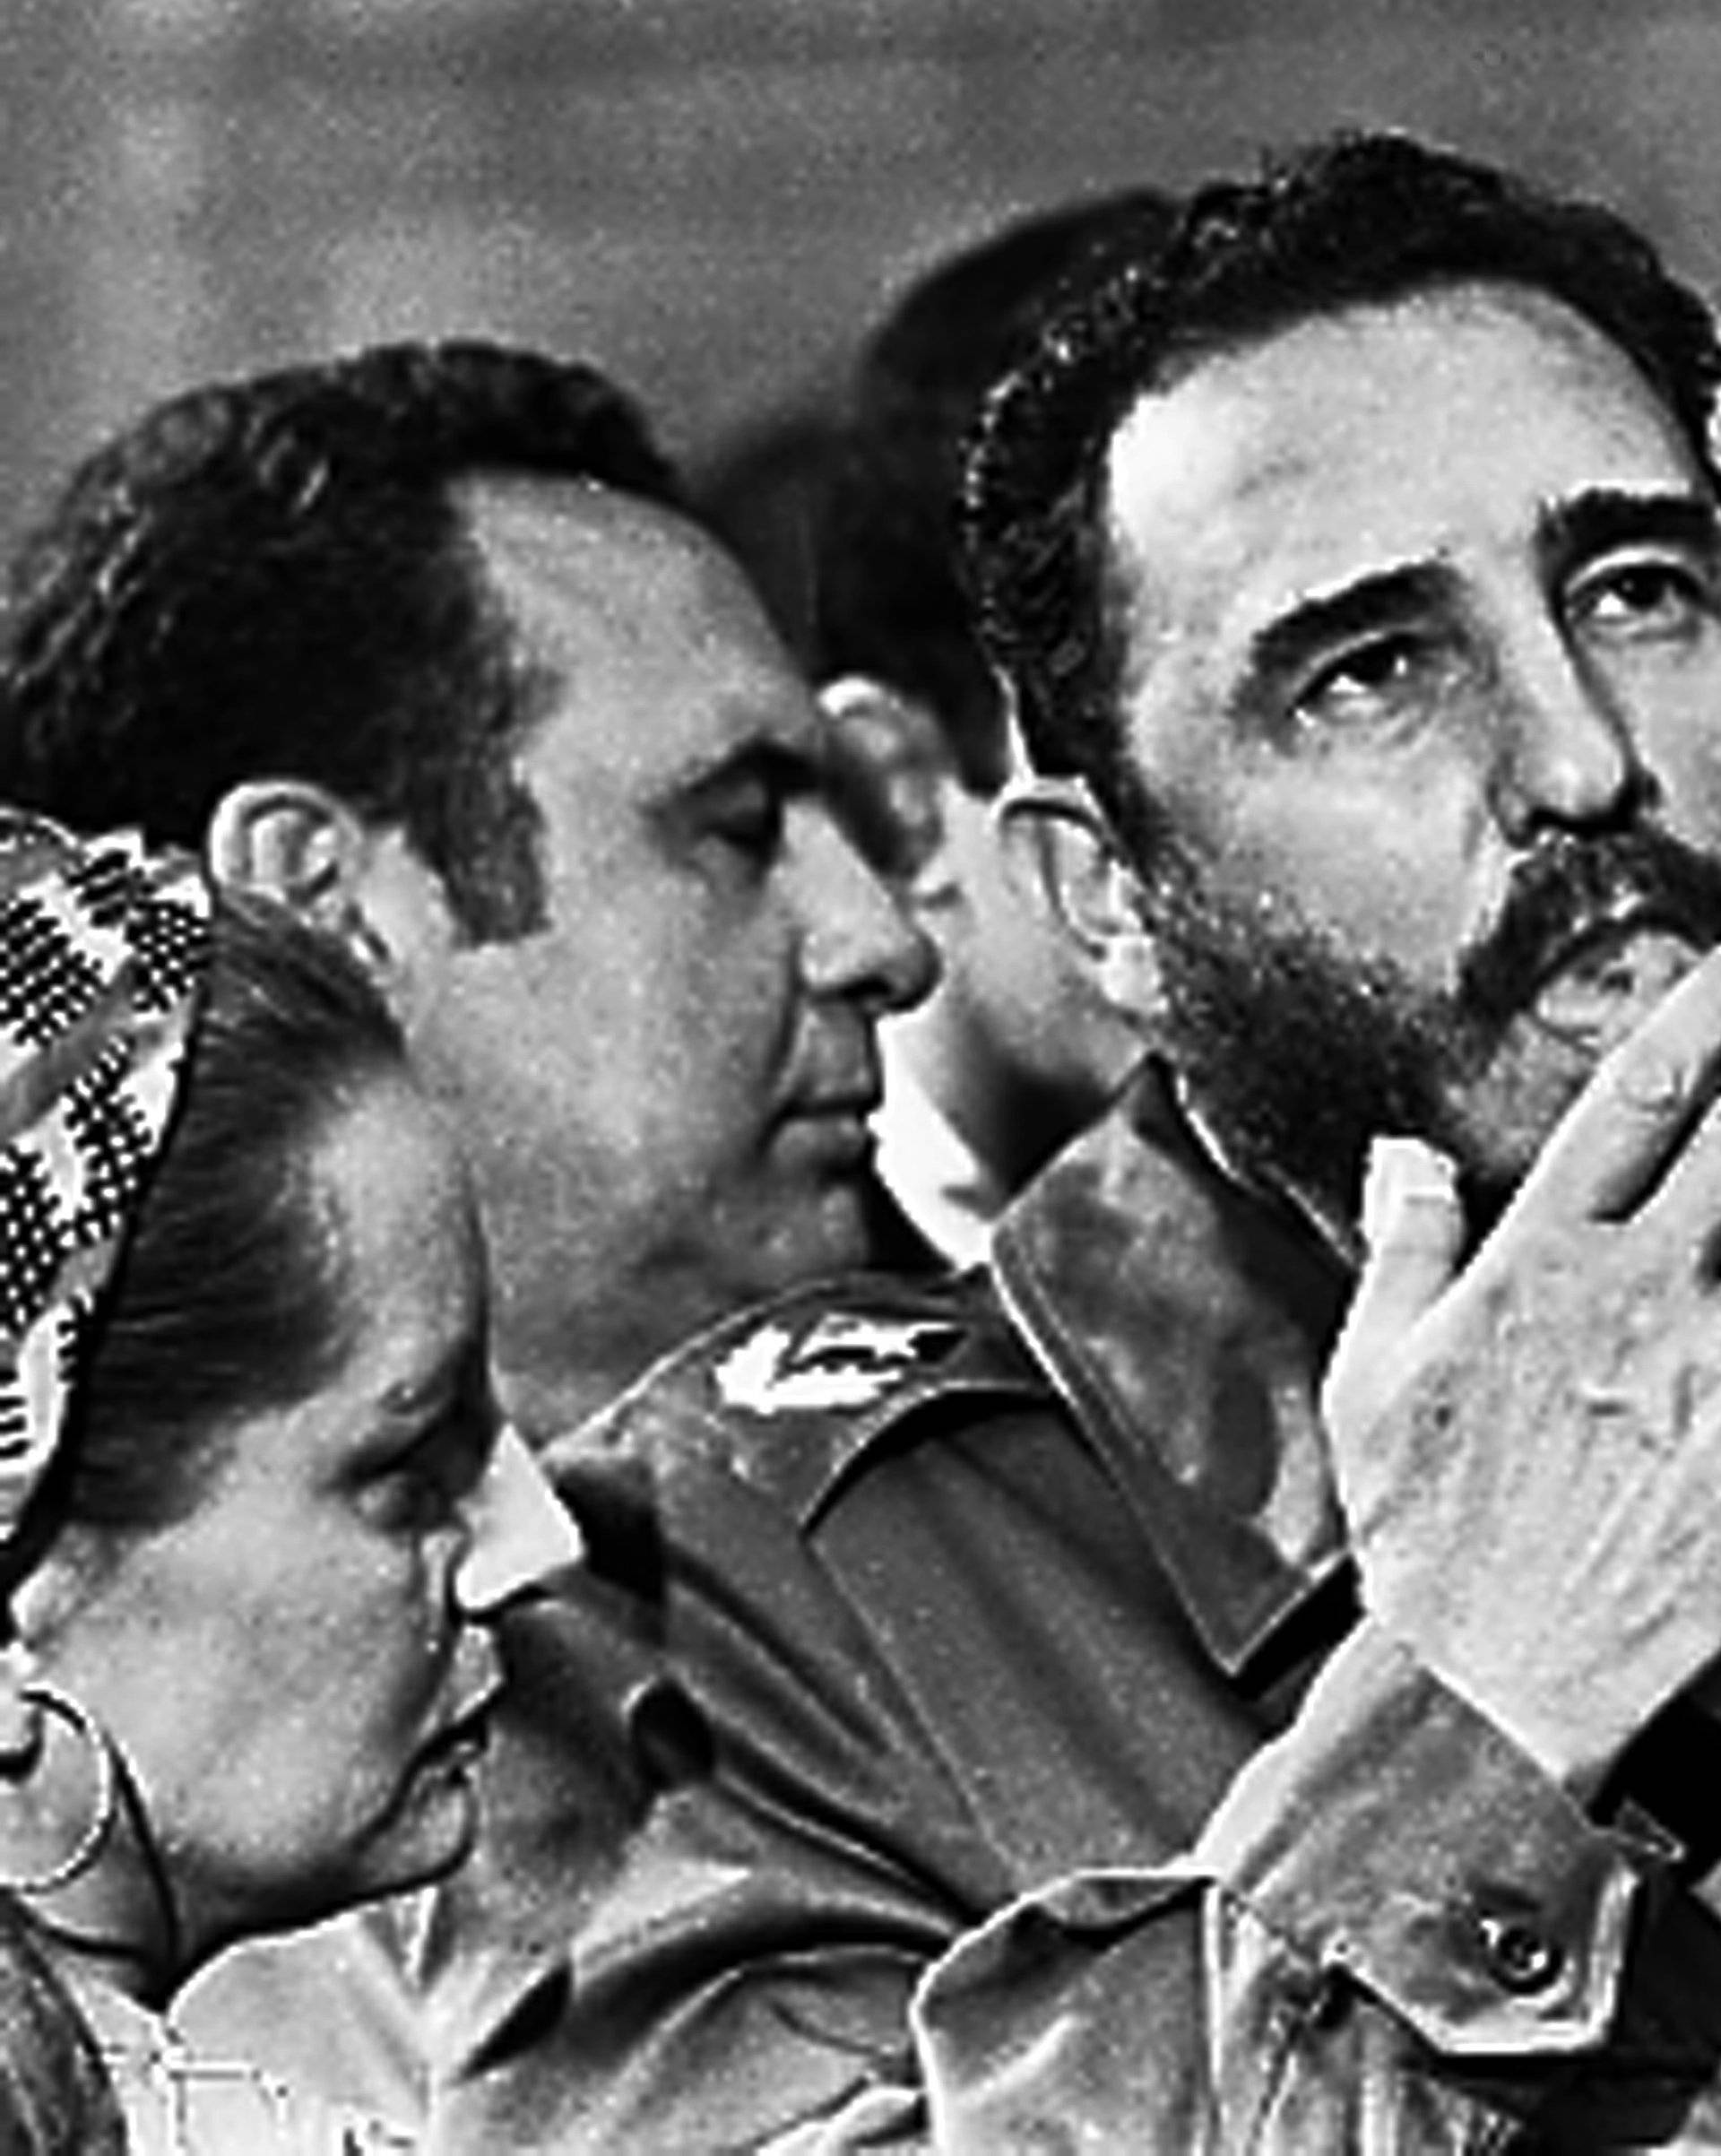 File photo of then Cuban Prime Minister Fidel Castro smoking a cigar during interviews with the press during a visit of U.S. Senator Charles McGovern, in Havana